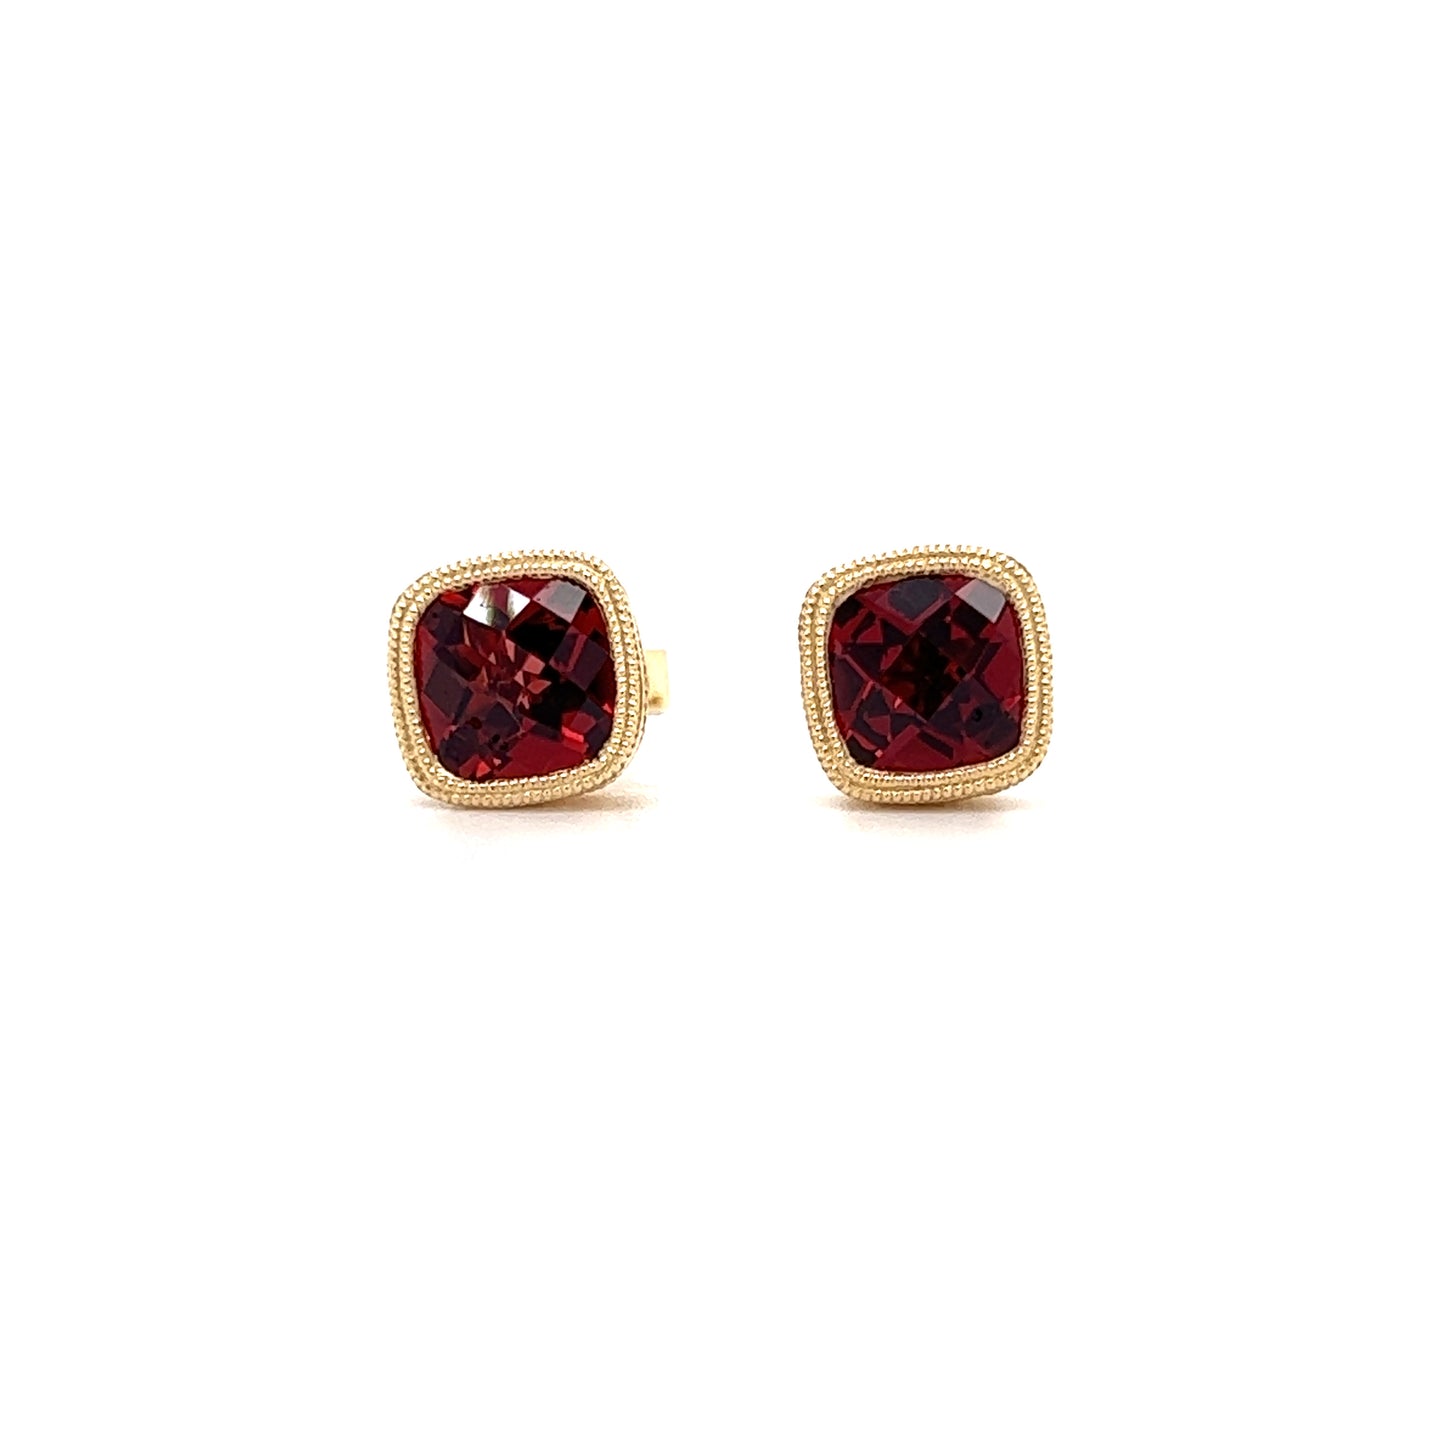 Garnet Stud Earrings with Milgrain and Filigree in 14K Yellow Gold Front View